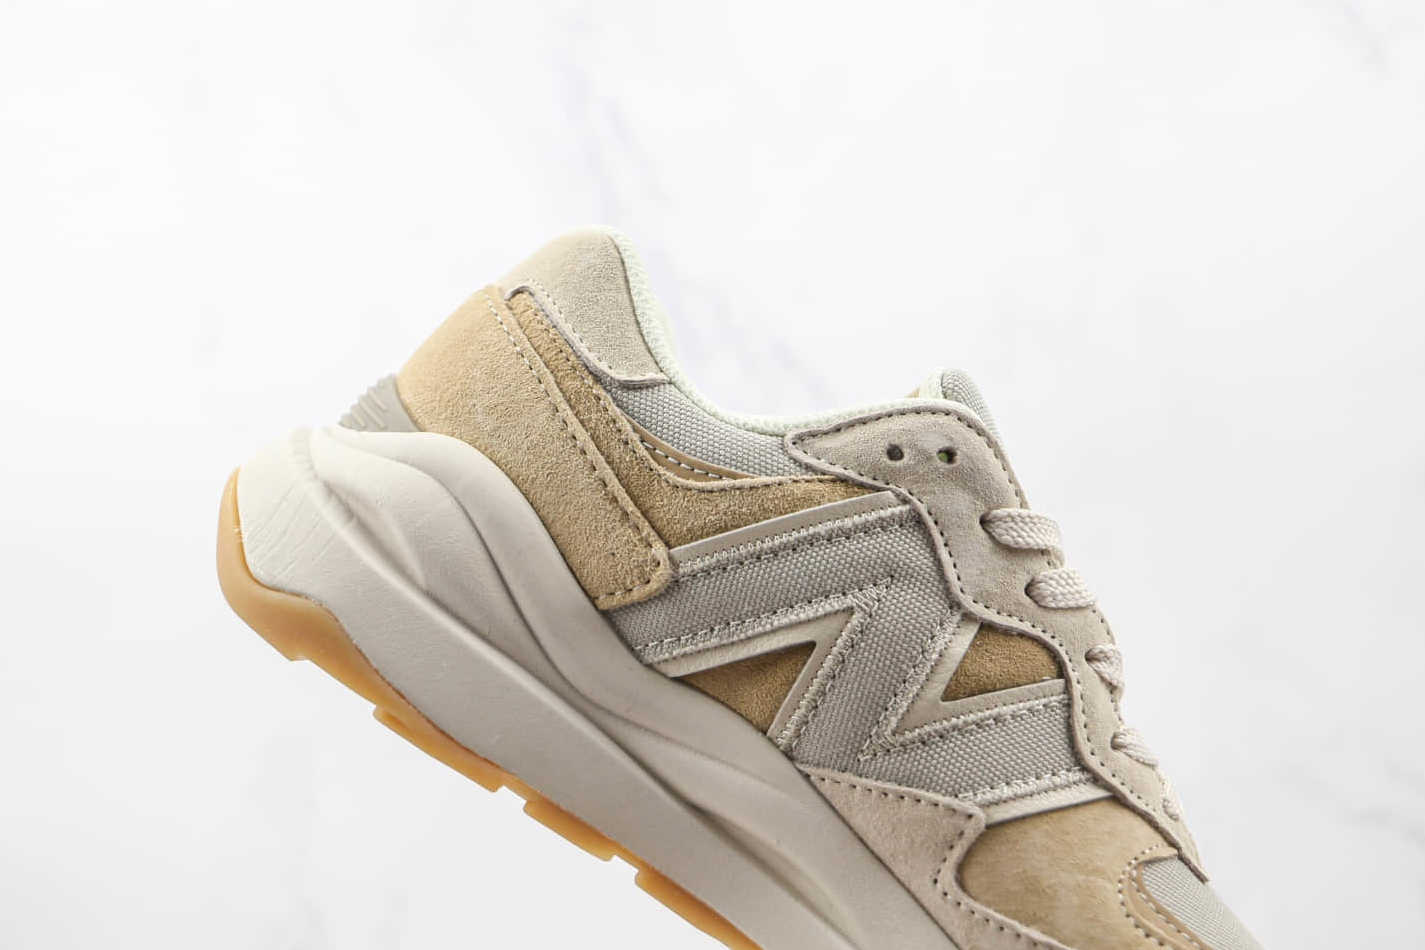 New Balance Unisex 57 40 Series Low-Top Beige M5740UP - Stylish and Comfortable Footwear for All Ages